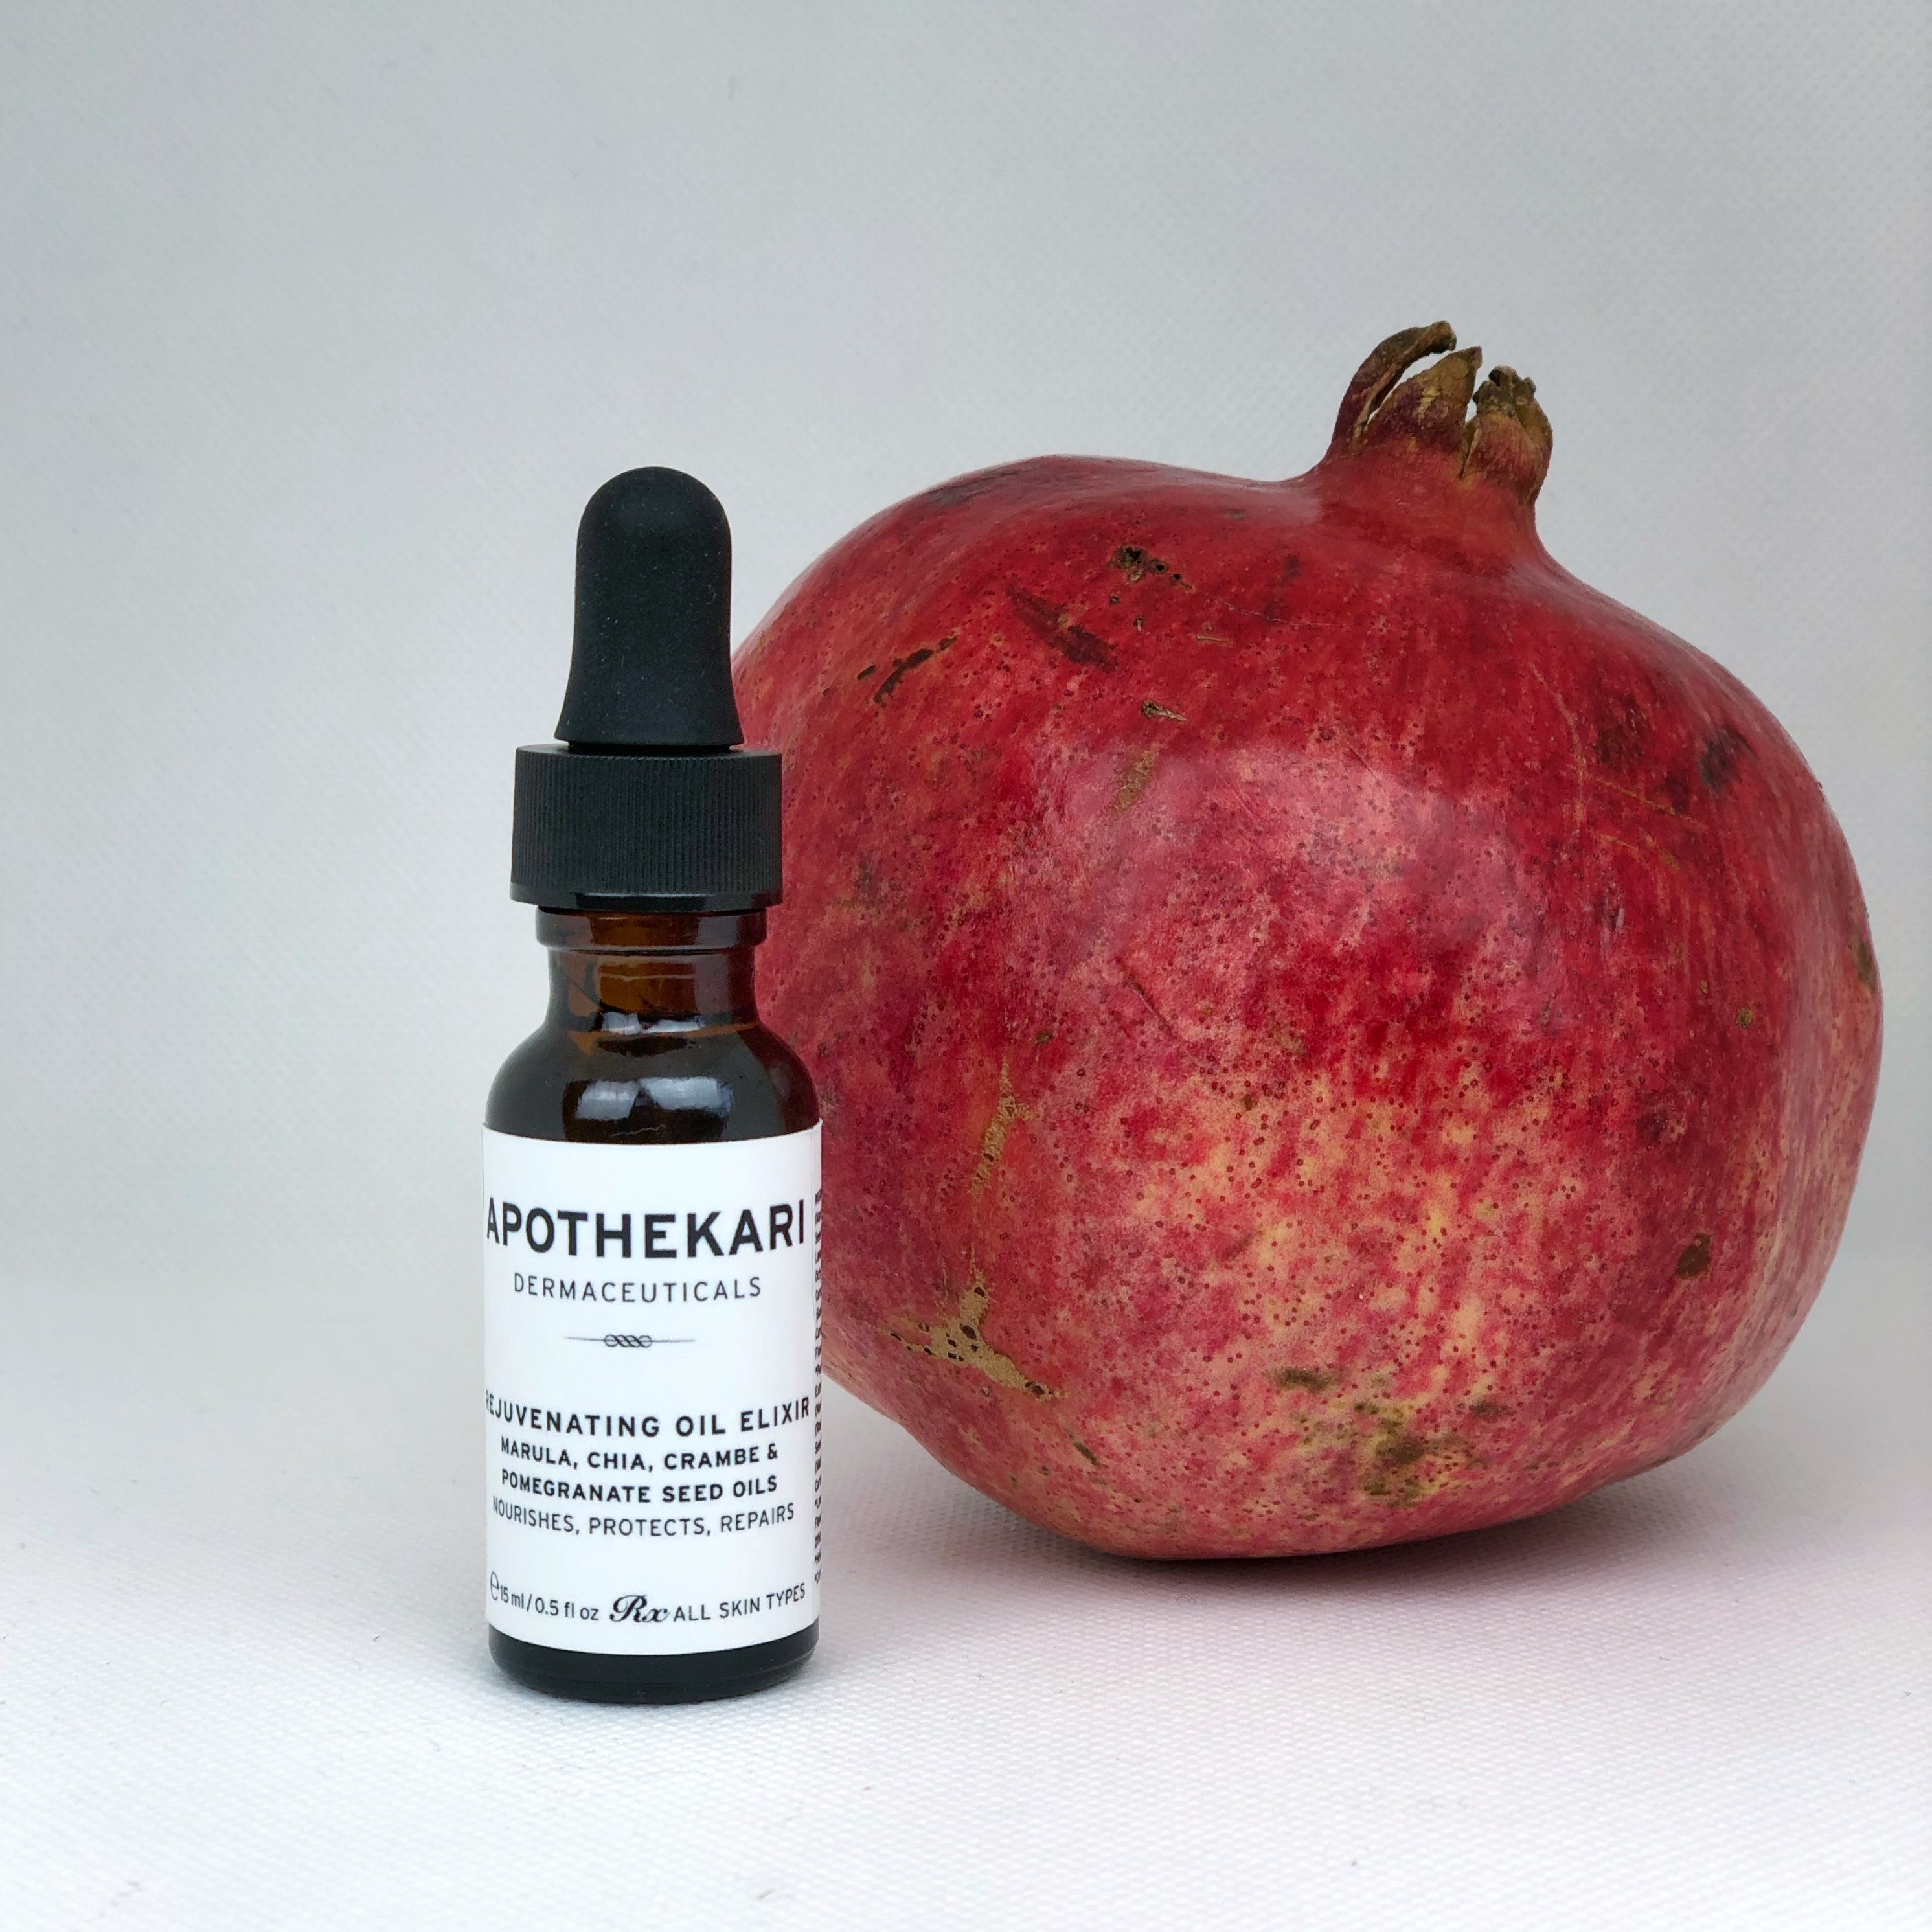 You are currently viewing Apothekari Rejuvenating Oil Elixir – New!